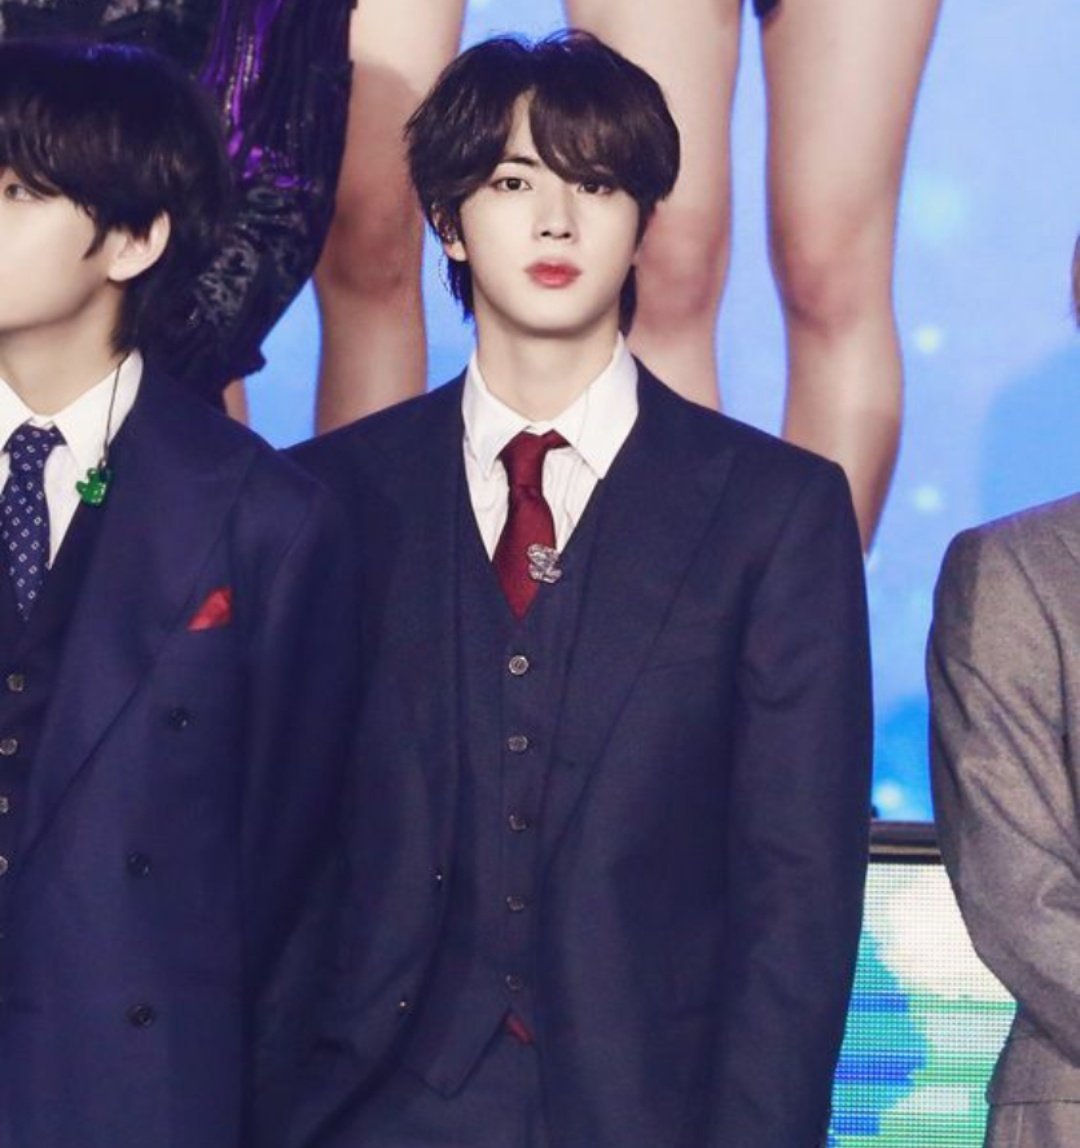 jin's beauty is on another level